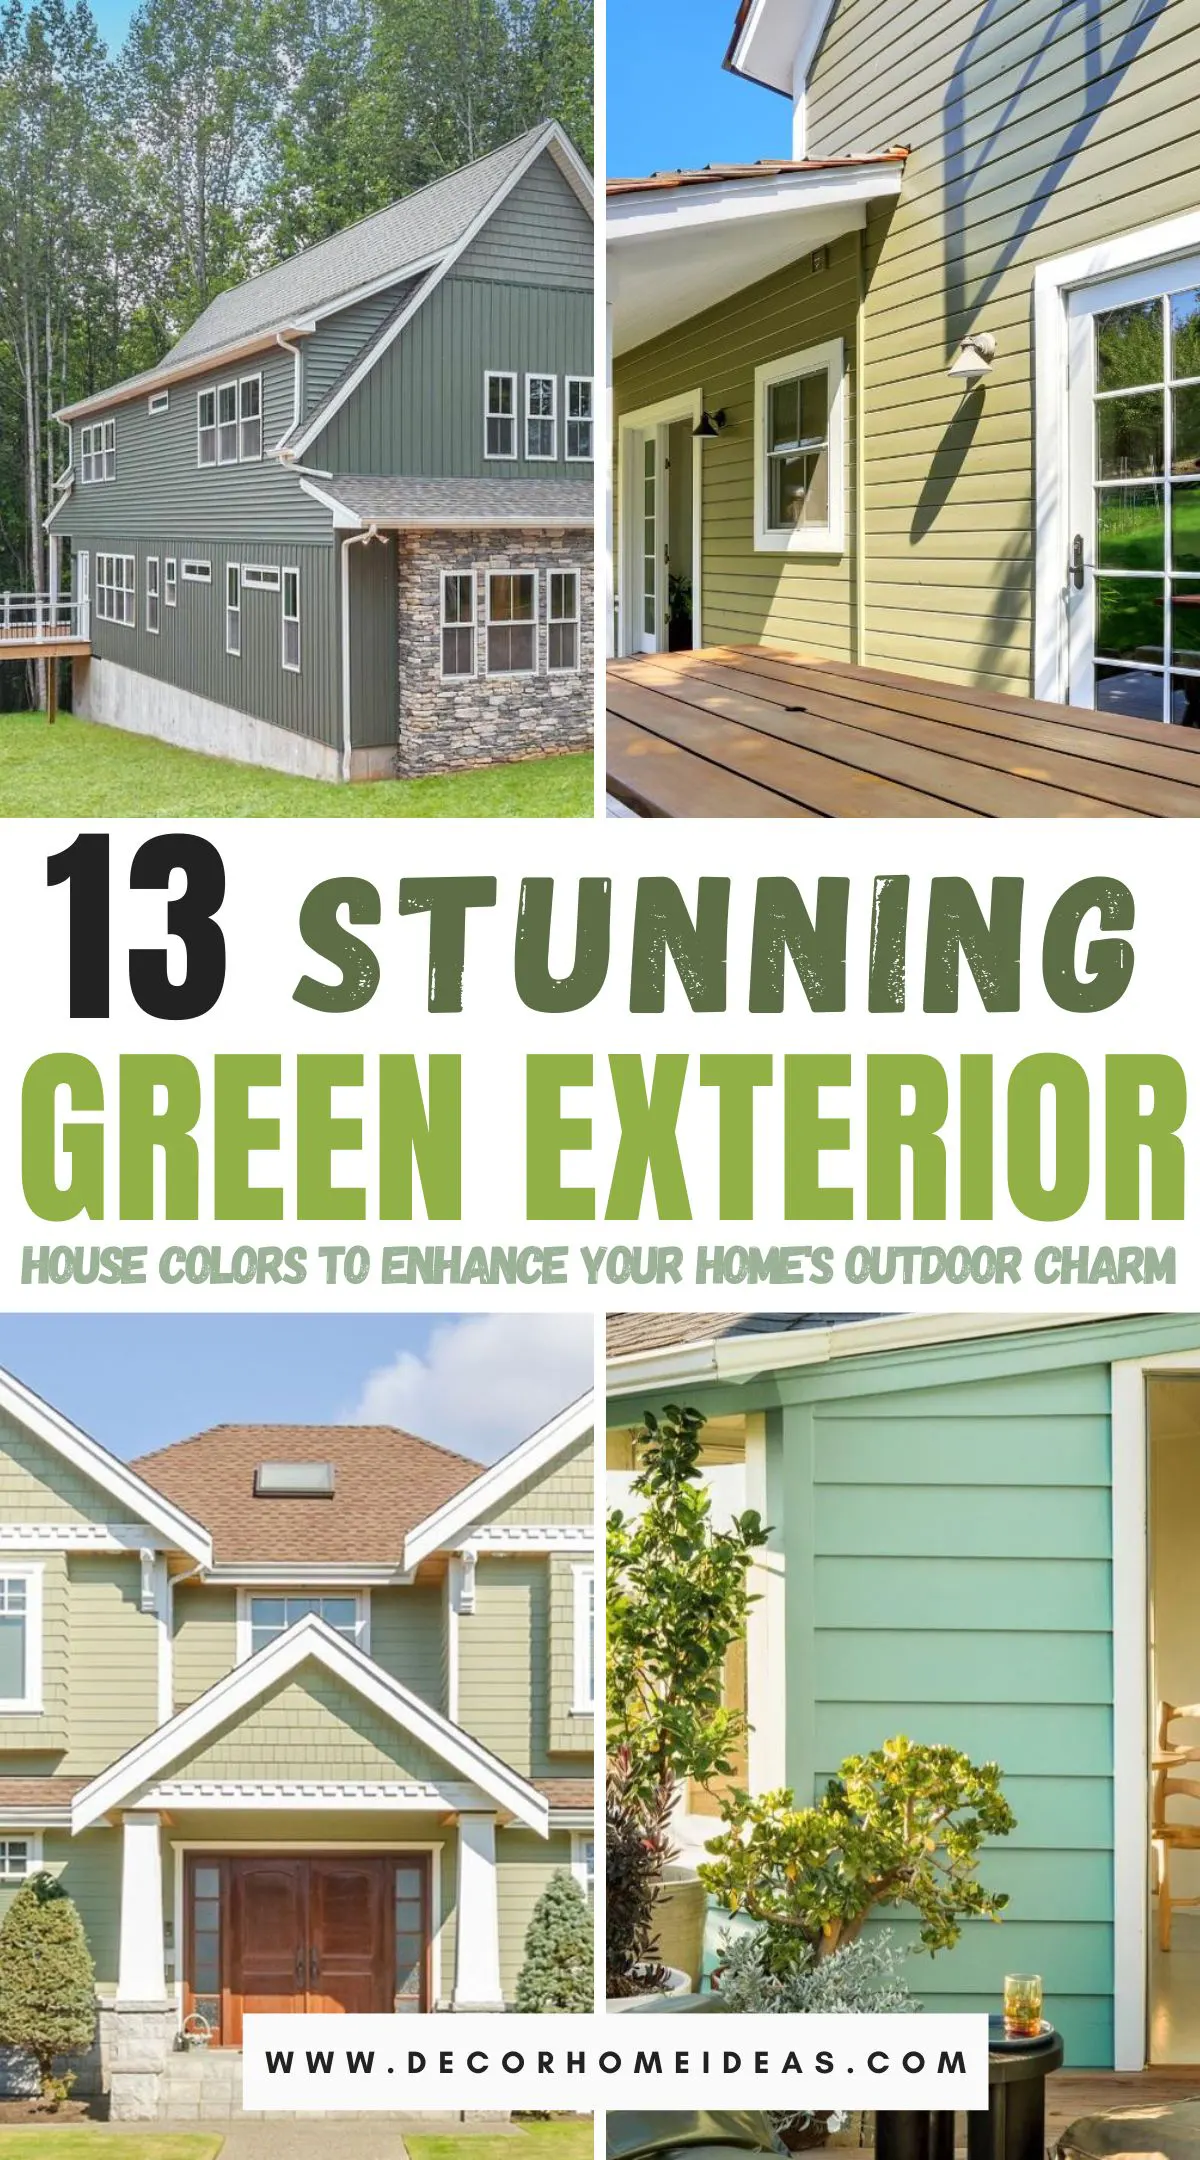 Enhance your home's outdoor charm with these 13 stunning green exterior house colors. From deep forest hues to light, refreshing shades, discover the perfect green to complement your home's architecture and landscape. Explore how these captivating colors can add a touch of elegance and natural beauty to your exterior.